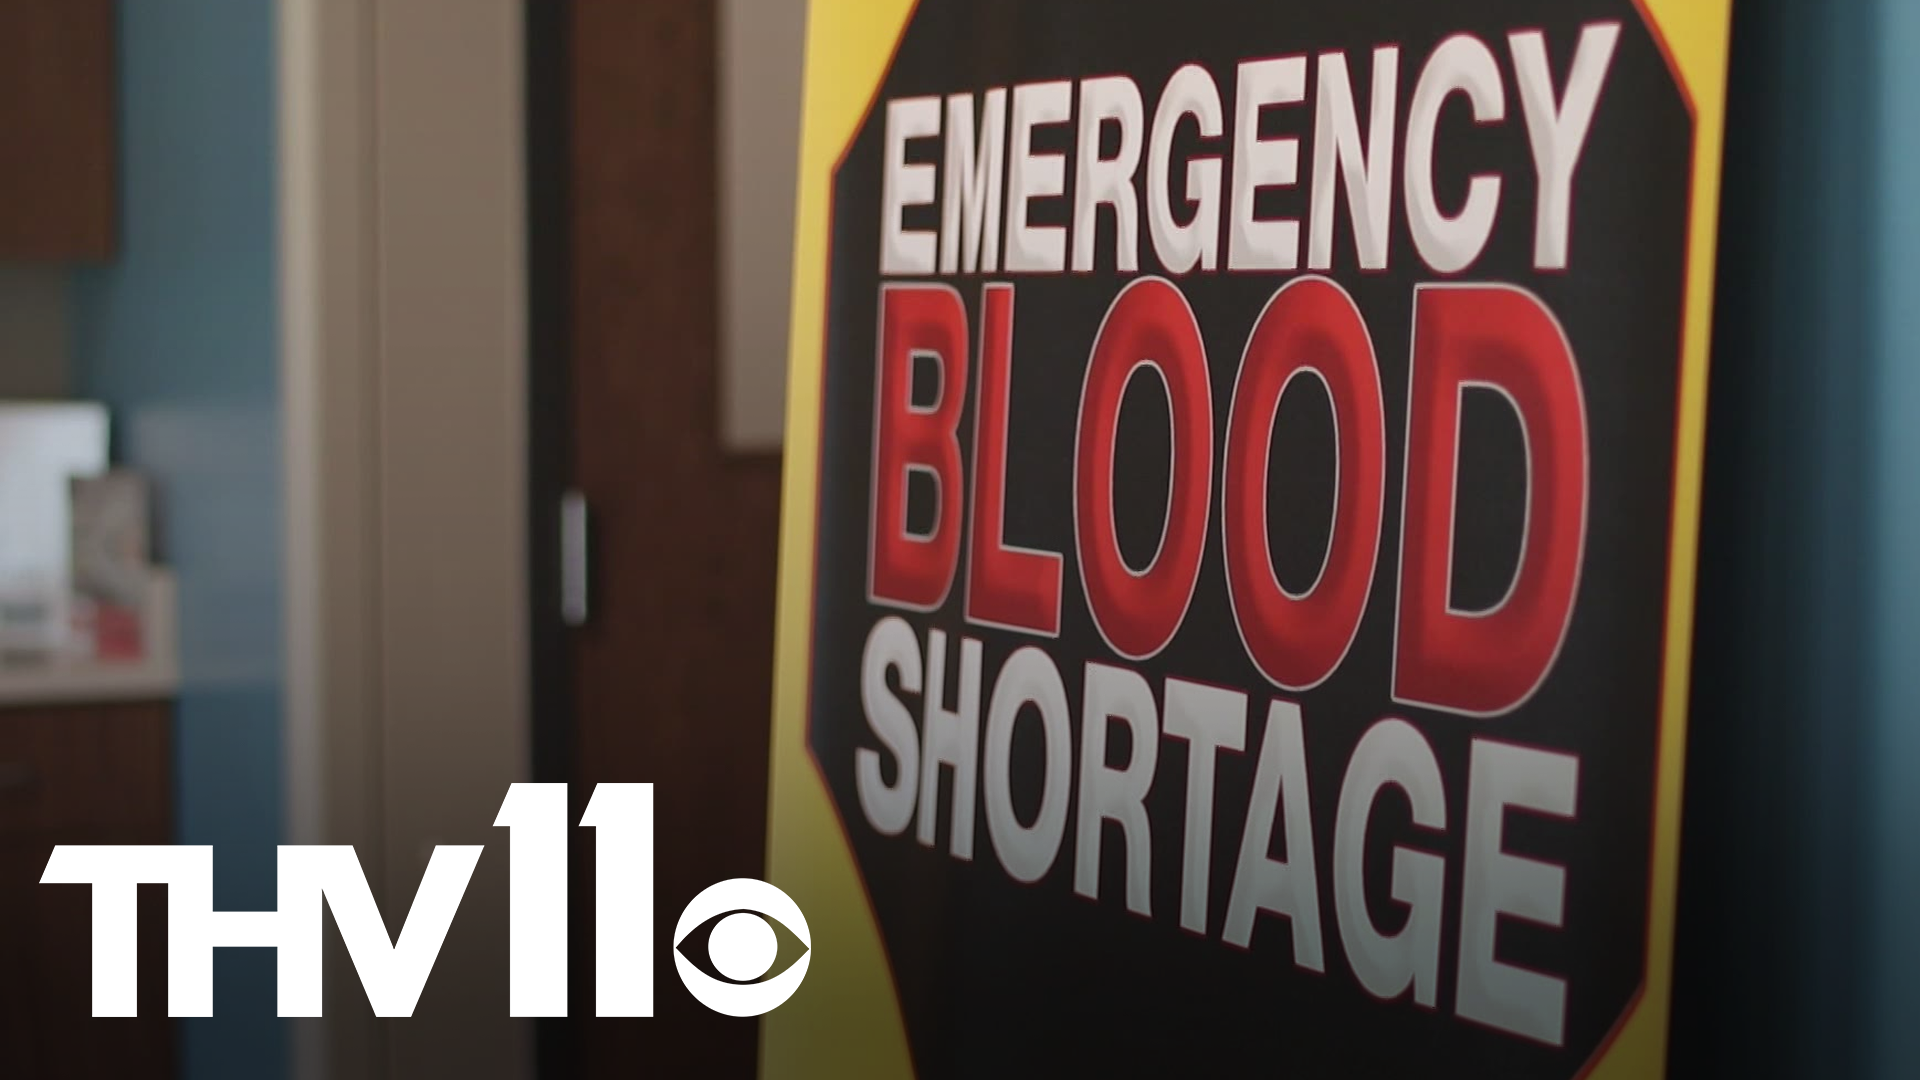 Hospitals are consistently in need of blood donations, but there's a supply emergency in Arkansas according to some officials.